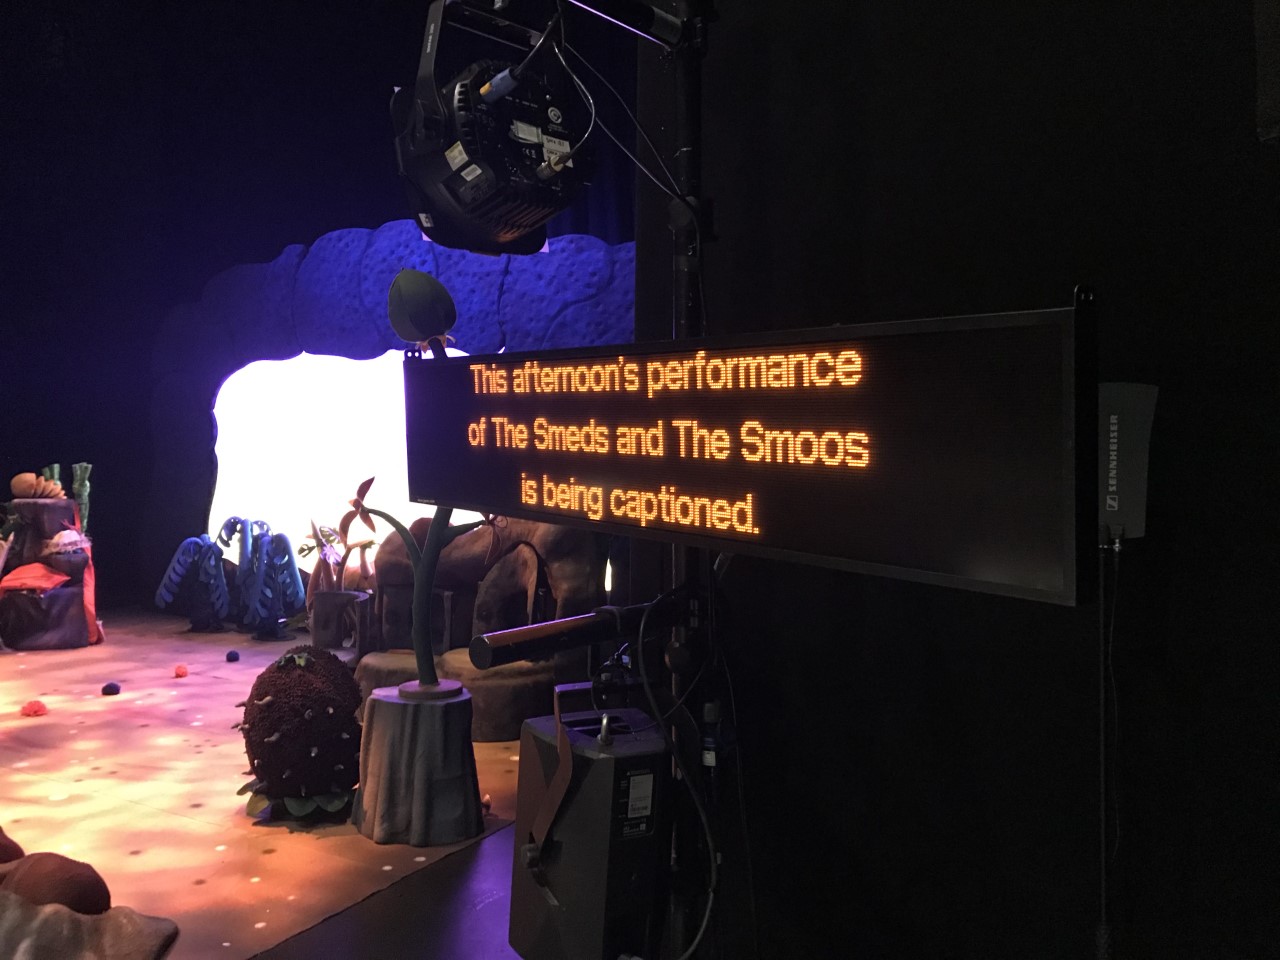 A caption unit pictured next to the empty stage for The Smeds and The Smoos, Yellow LED text on the black unit reads 'This afternoon's performance of The Smeds and The Smoos is being captioned.'